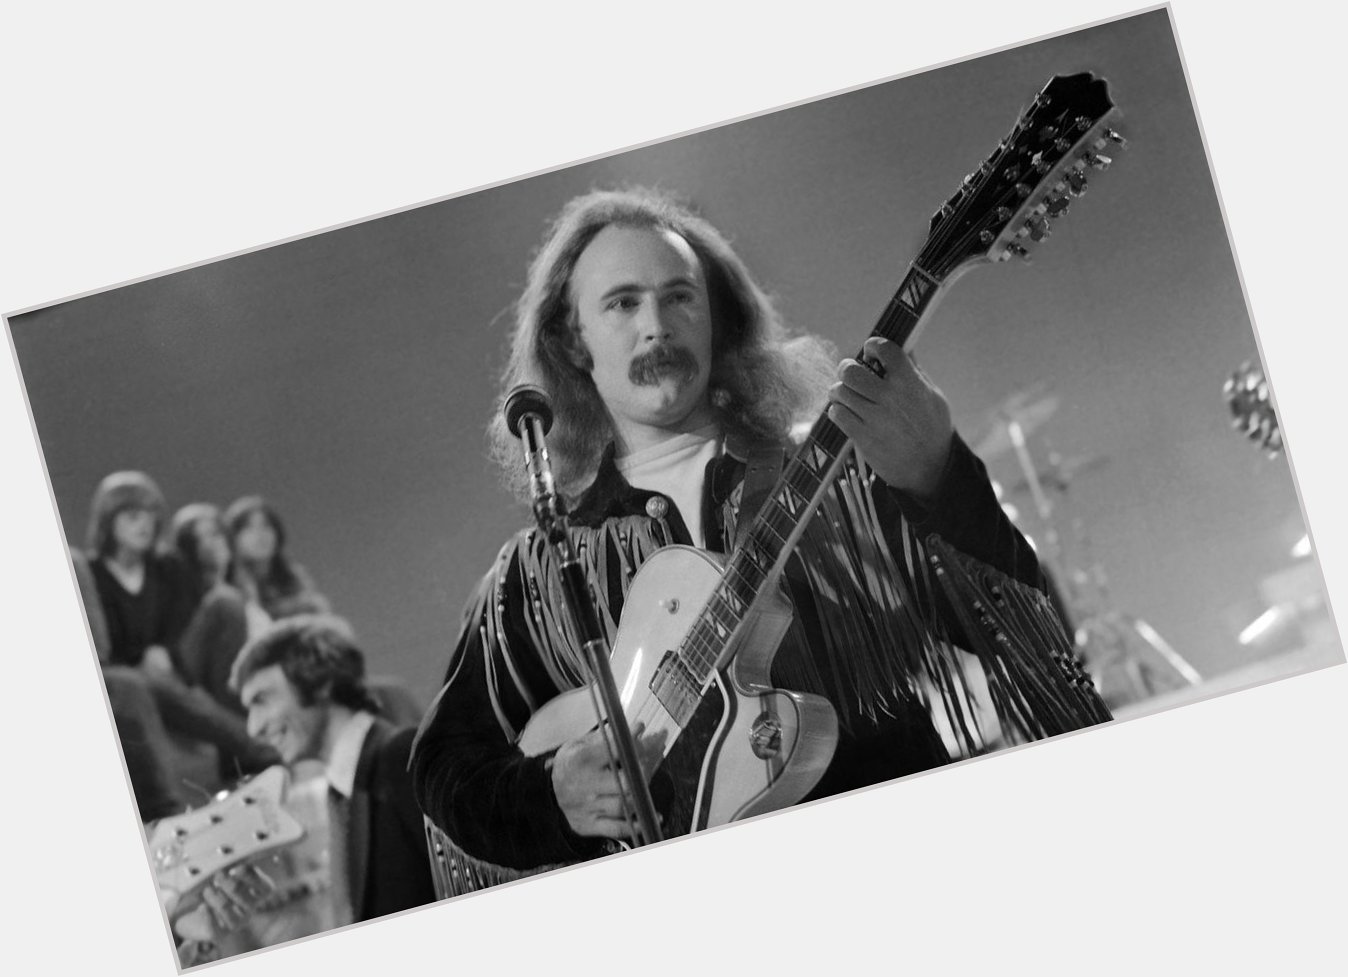 Happy birthday David Crosby! Read our 1970 interview where the former Byrd flies high with 